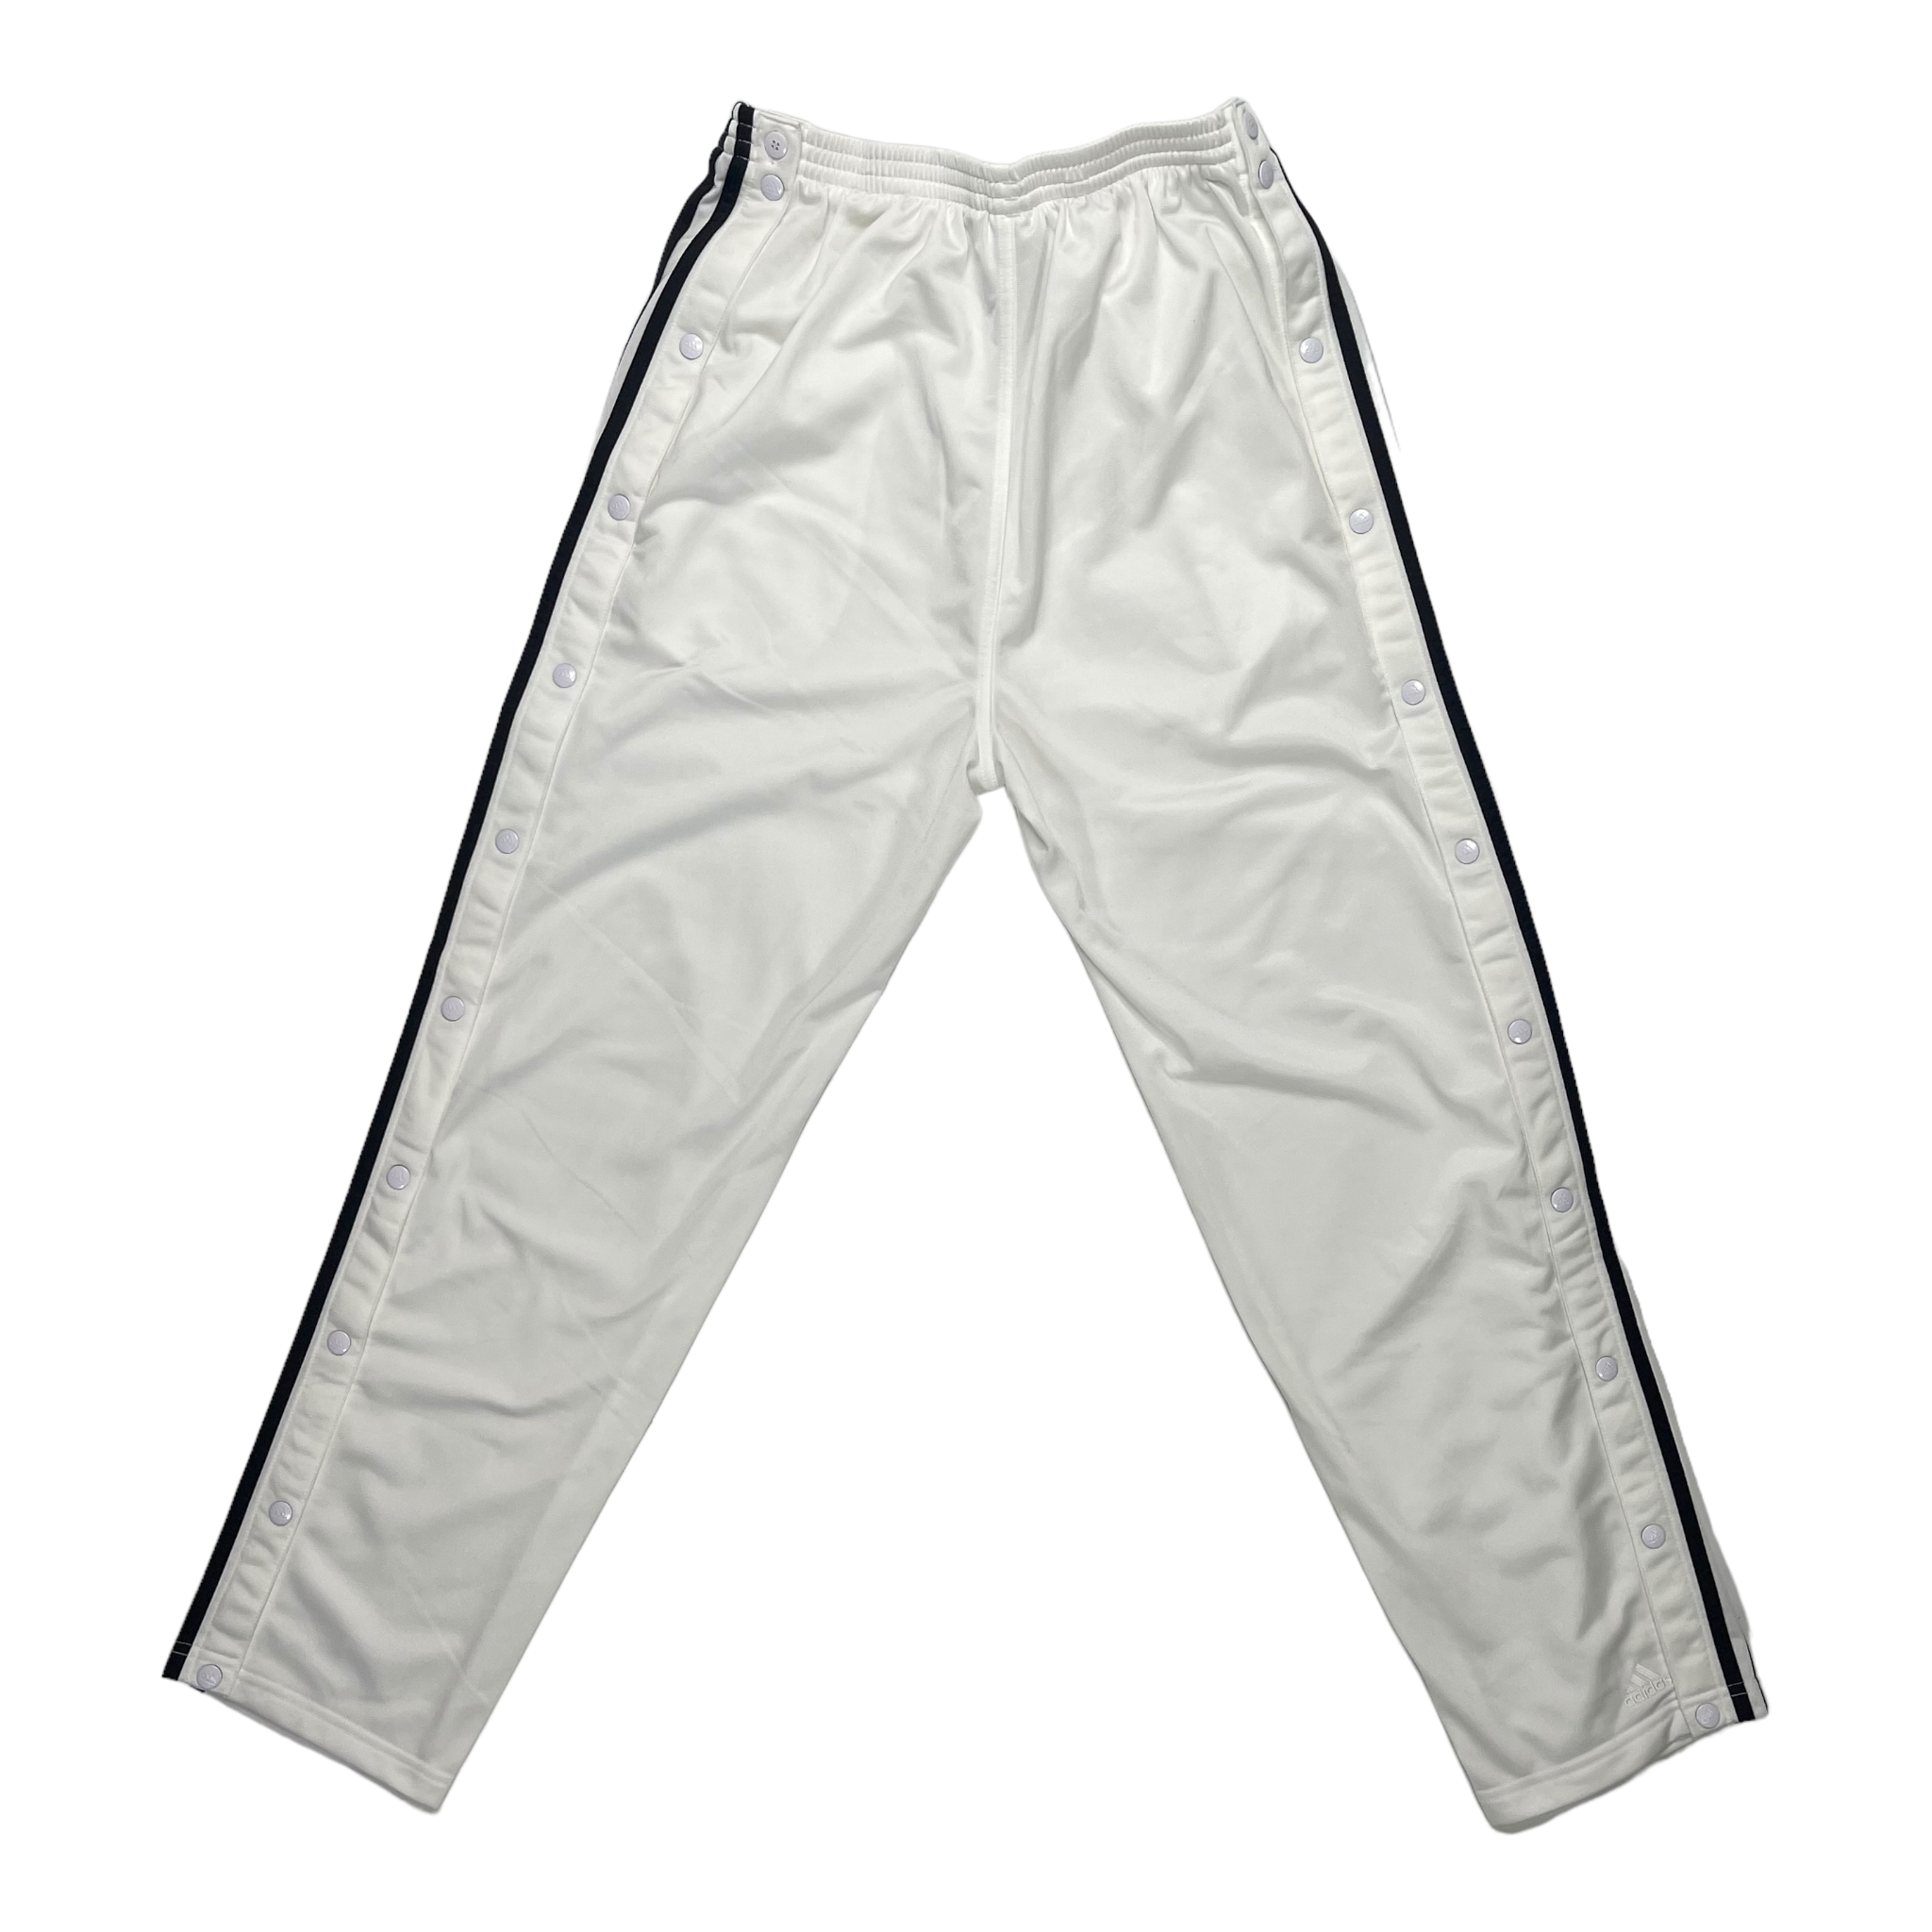 adidas tear away track pants for women sale  Arvind Sport  adidas  Sportswear Shoes  Clothes in Unique Offers